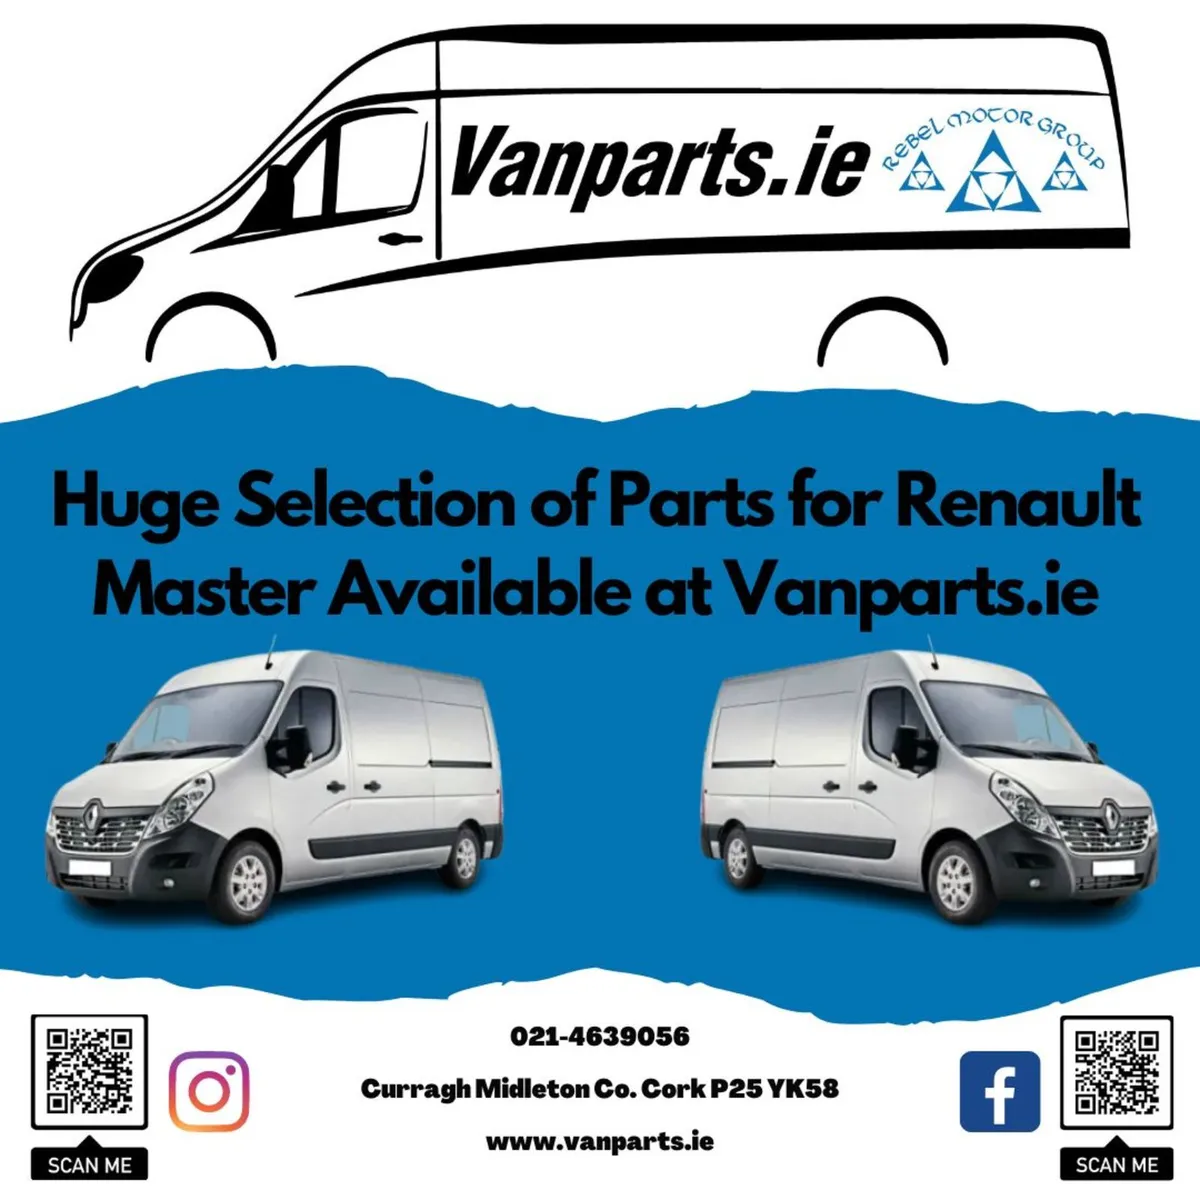 Huge Selection of New Renault Master Parts - Image 1